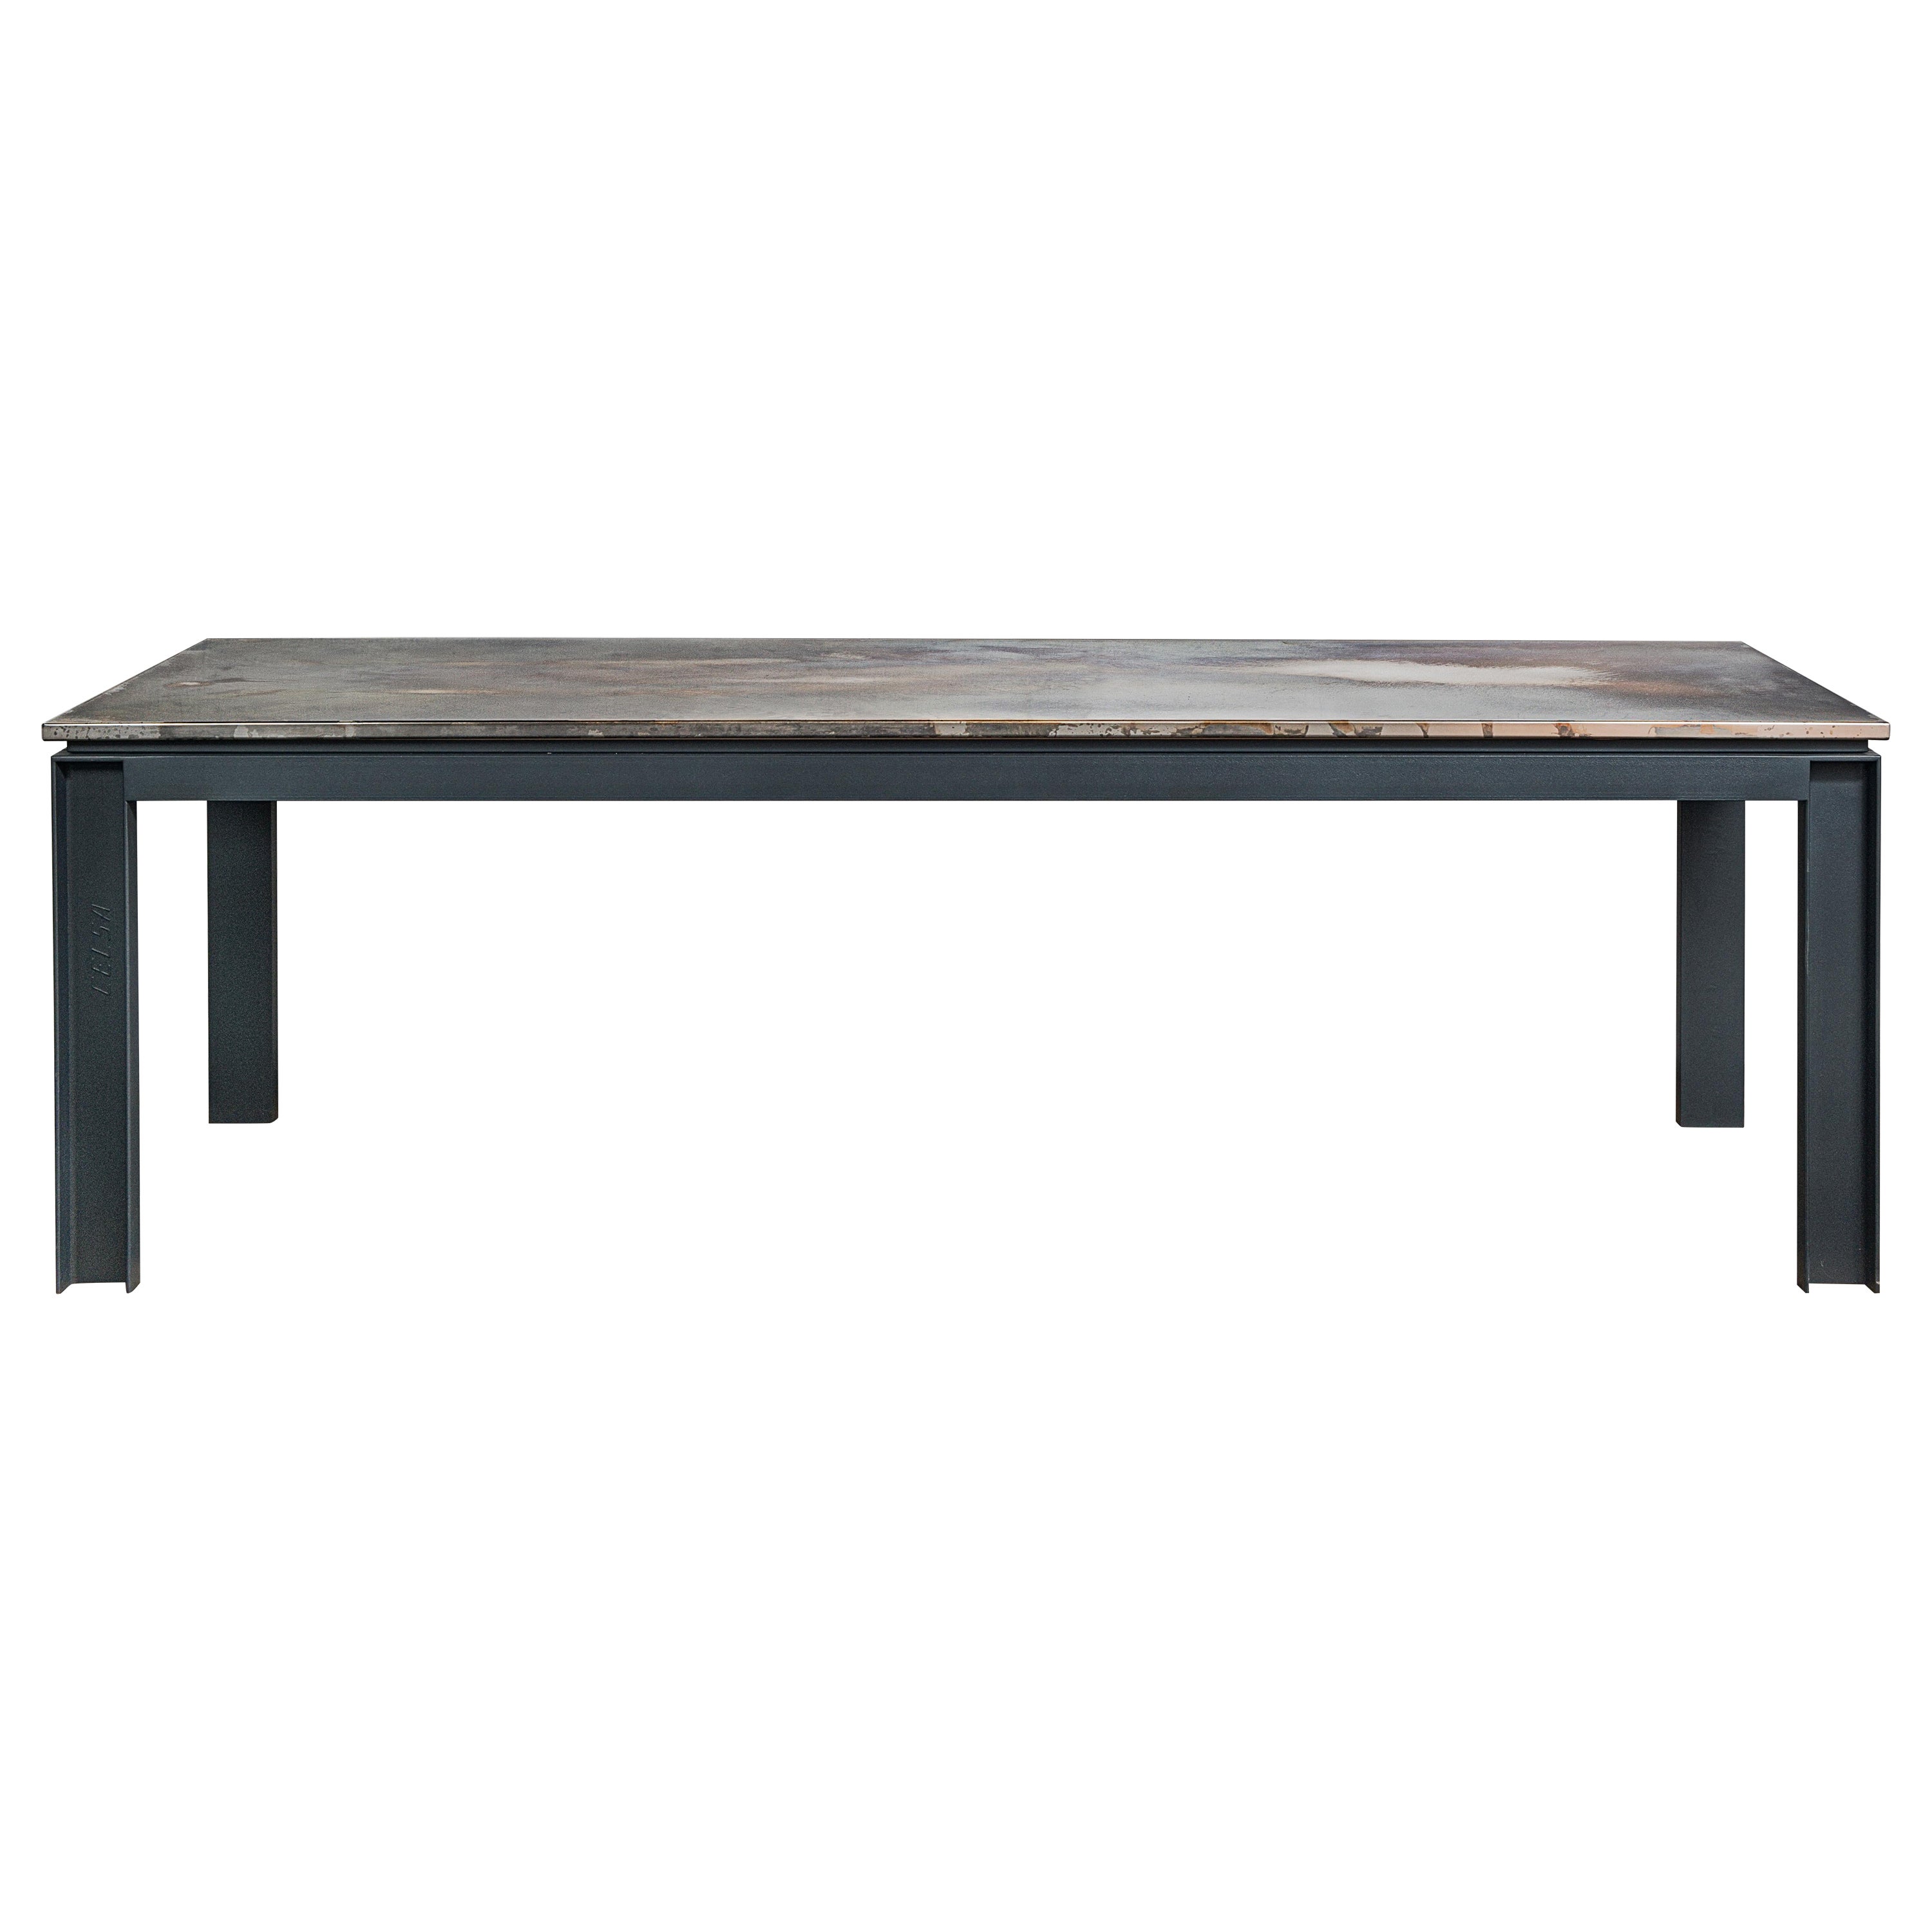 Gemona Dining Table by Delvis Unlimited For Sale